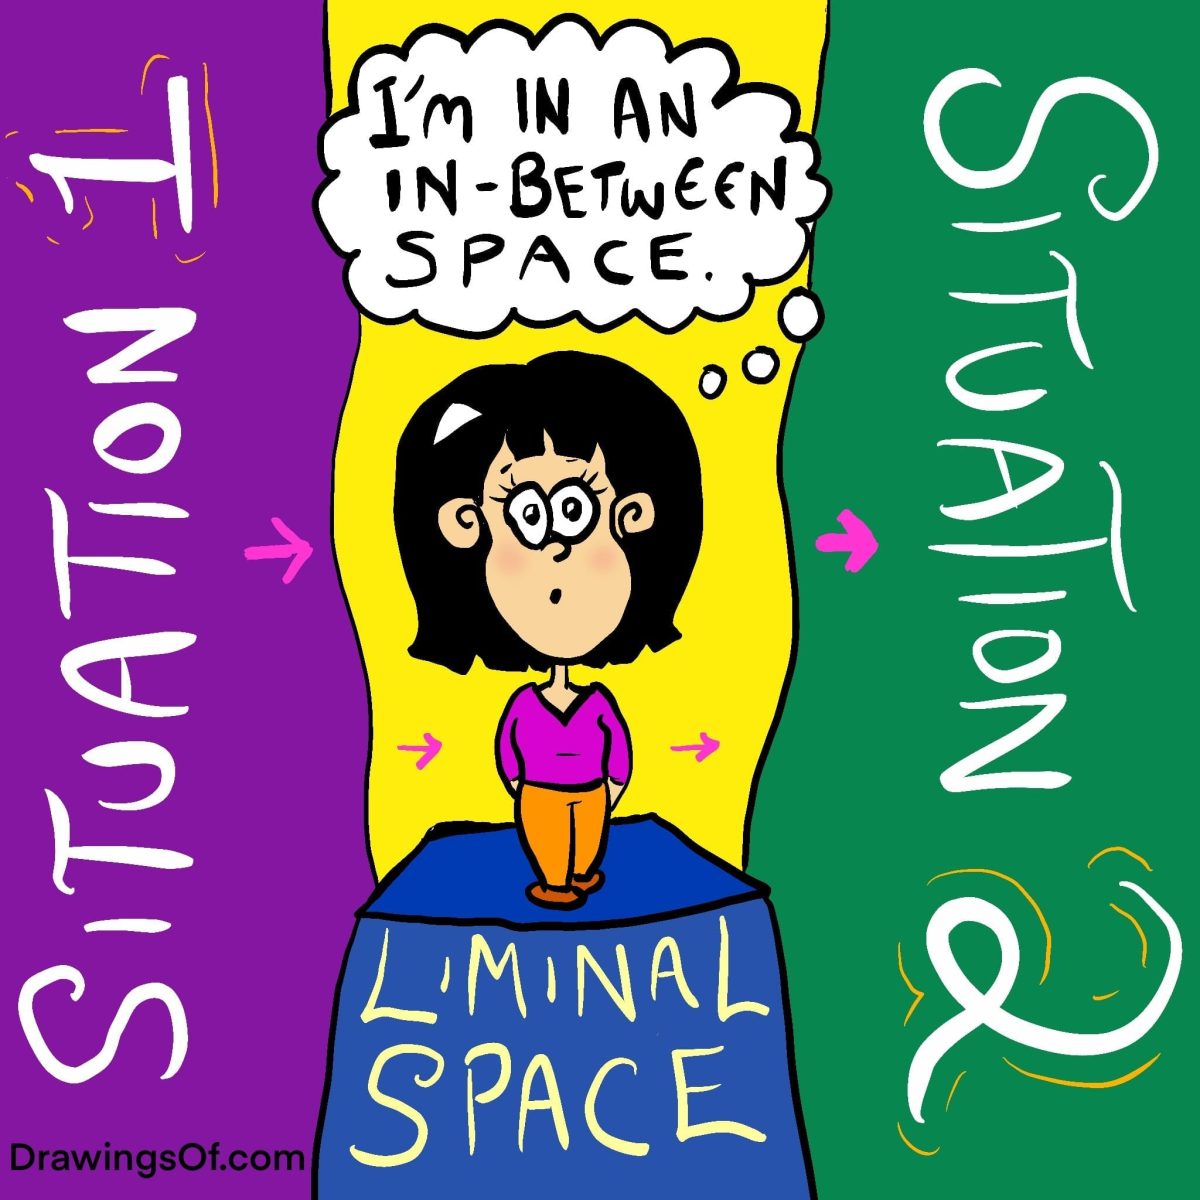 Liminal space definition